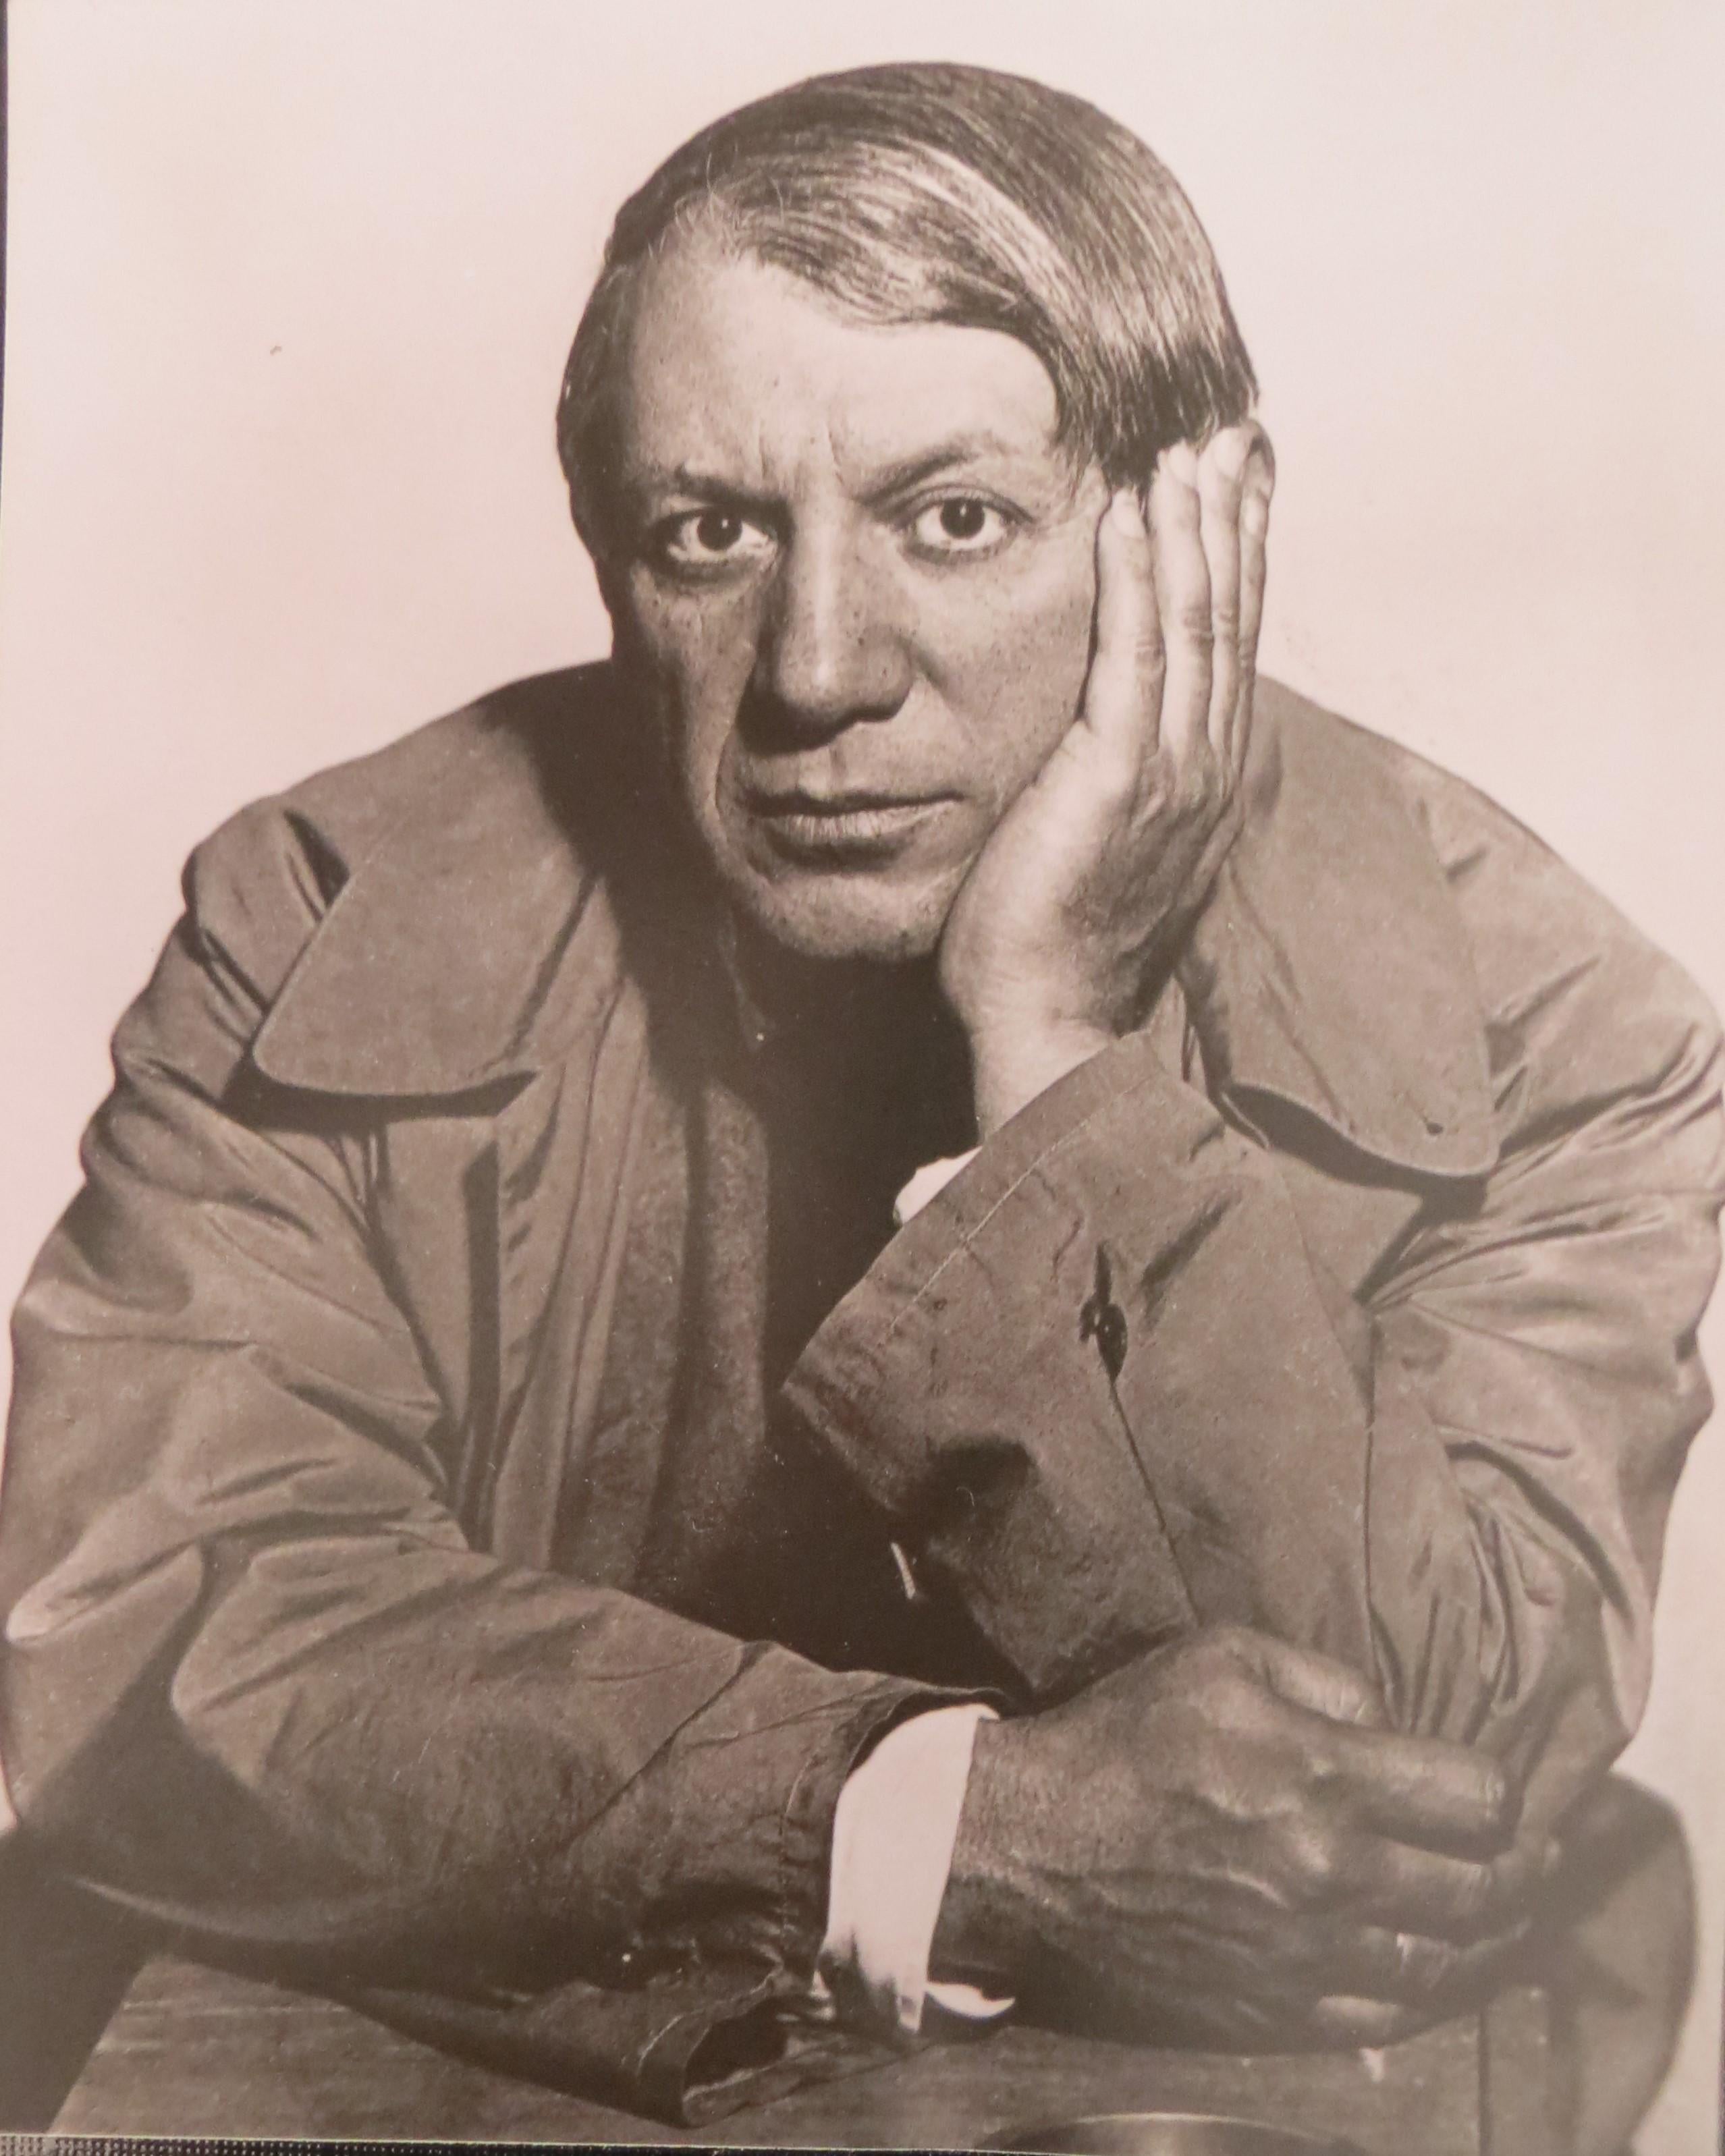 Man Ray, Pablo Picasso , 1933 Man Ray (American/French, 1890-1976), sepia gelatin silver print , studio stamp from Man Ray Paris stamp verso, matted and framed under glass 6